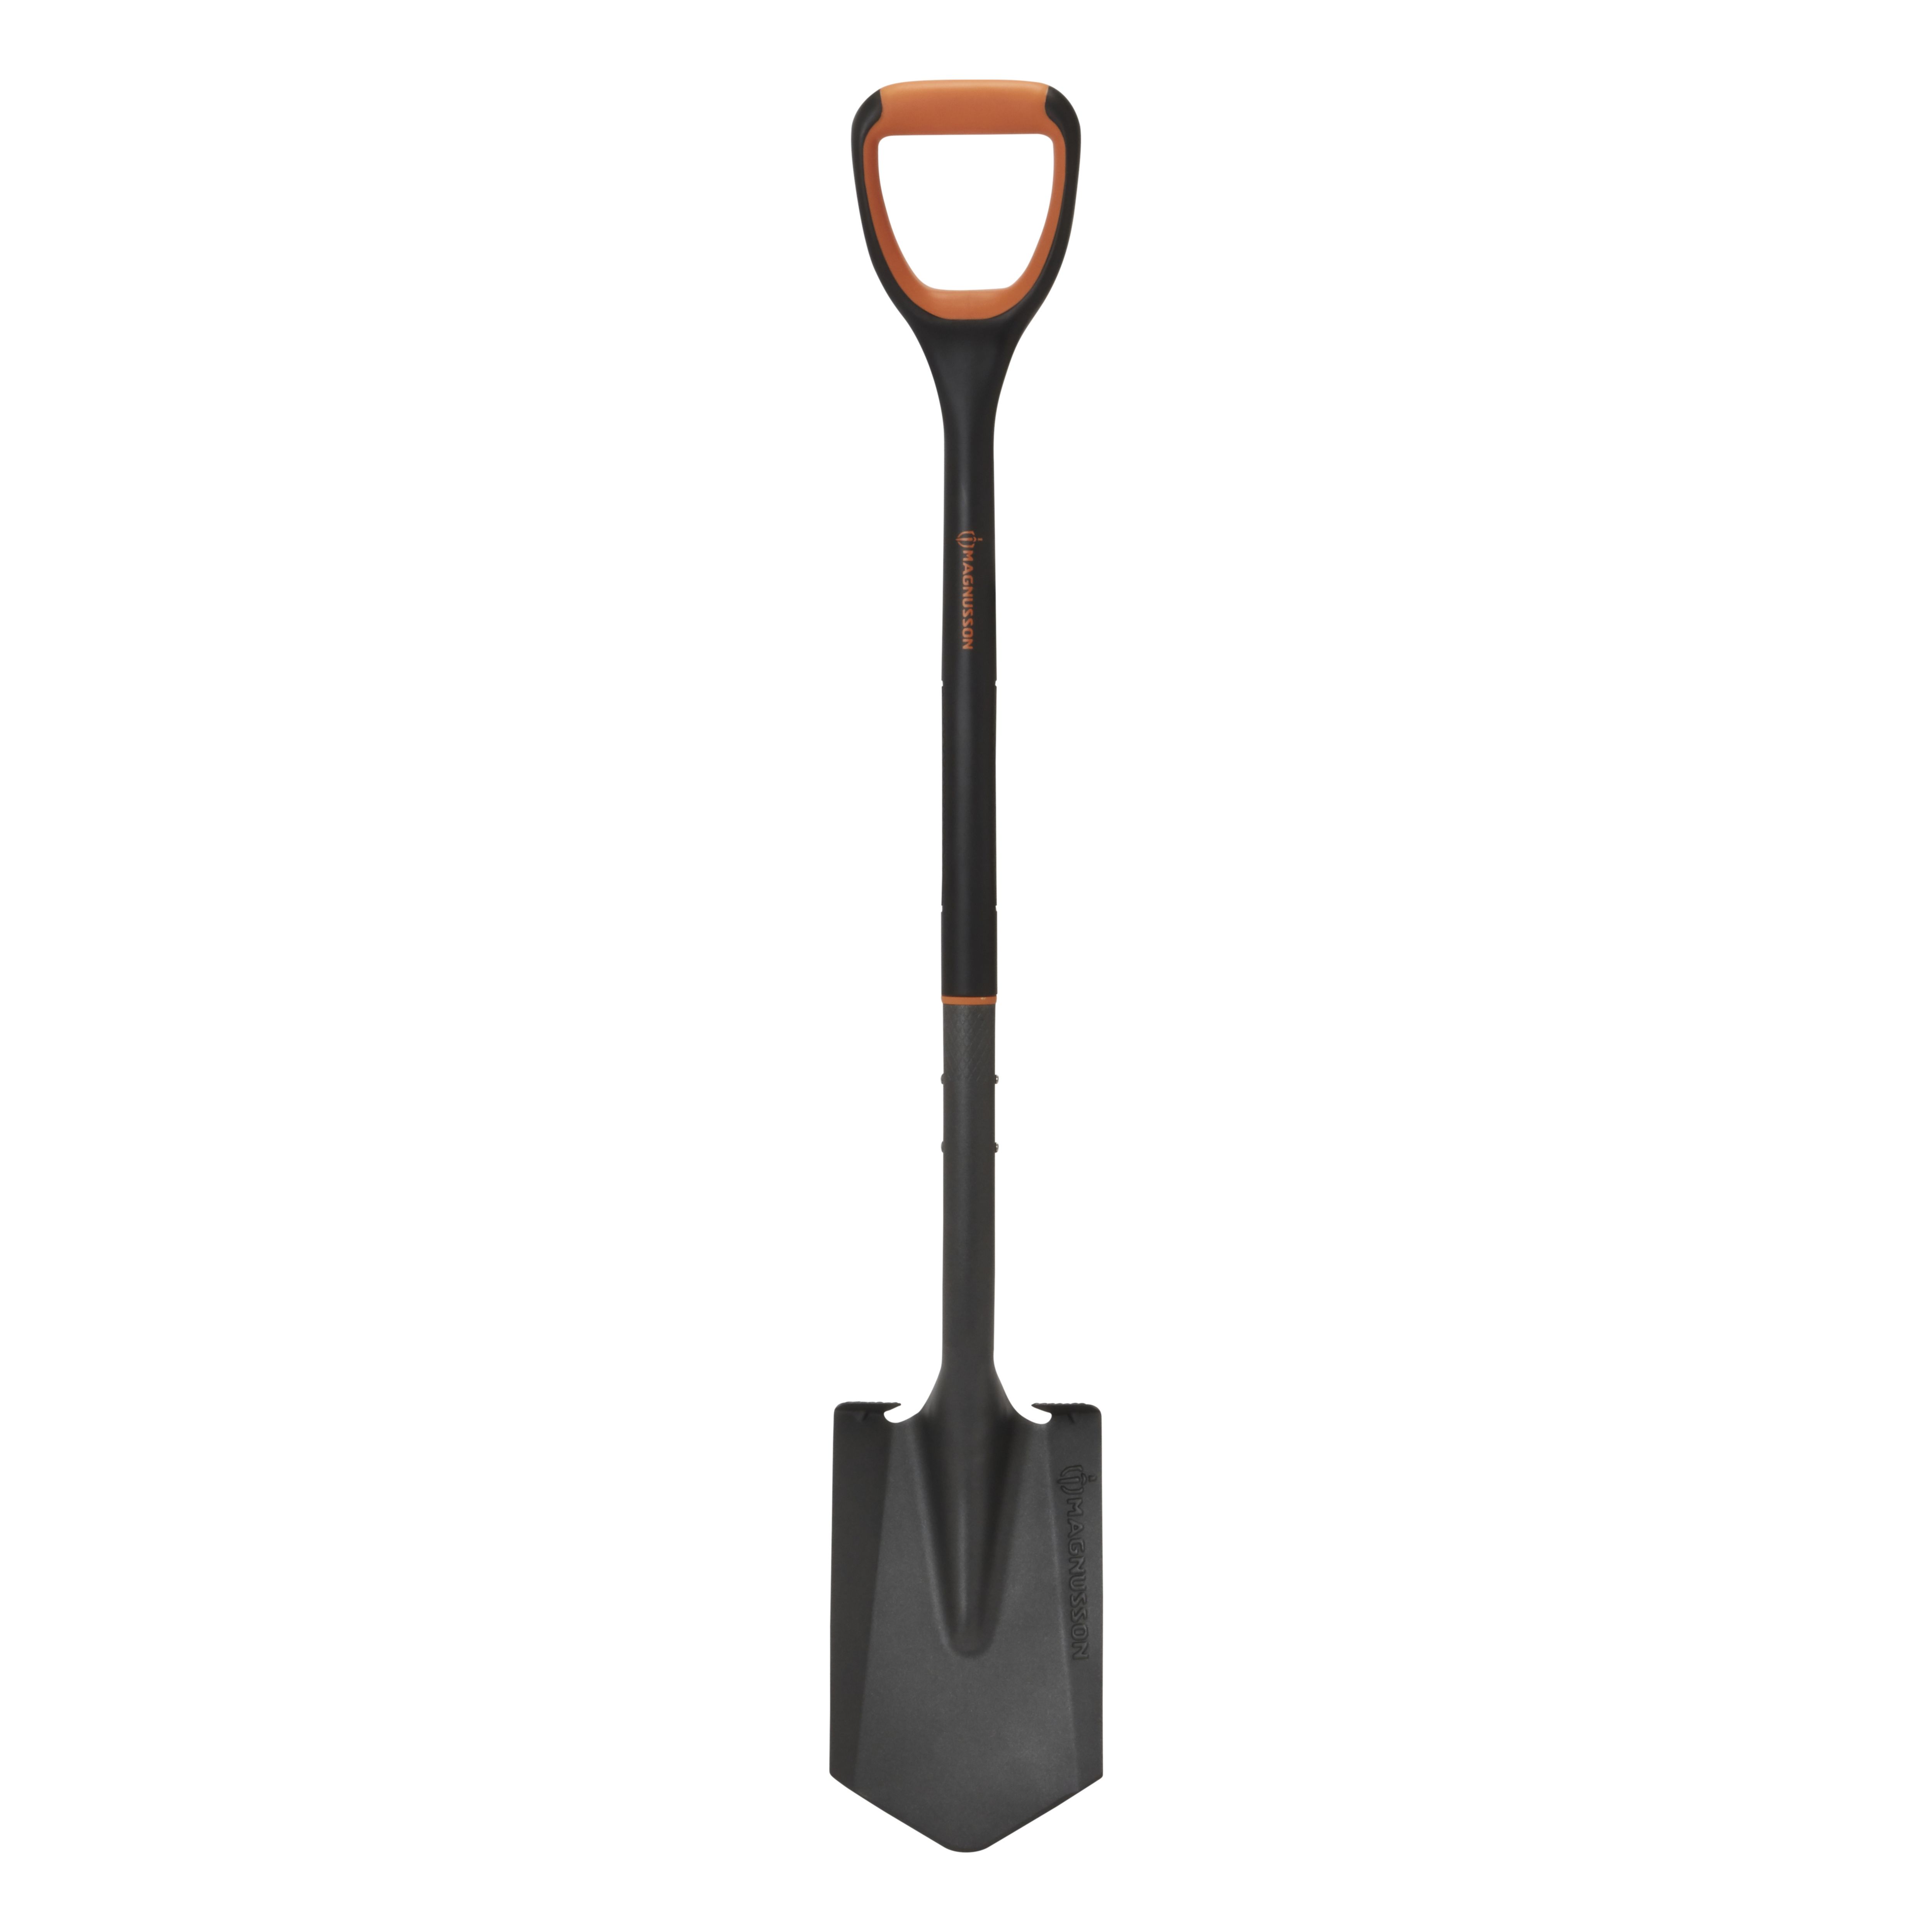 Magnusson Composite Pointed Digging Spade